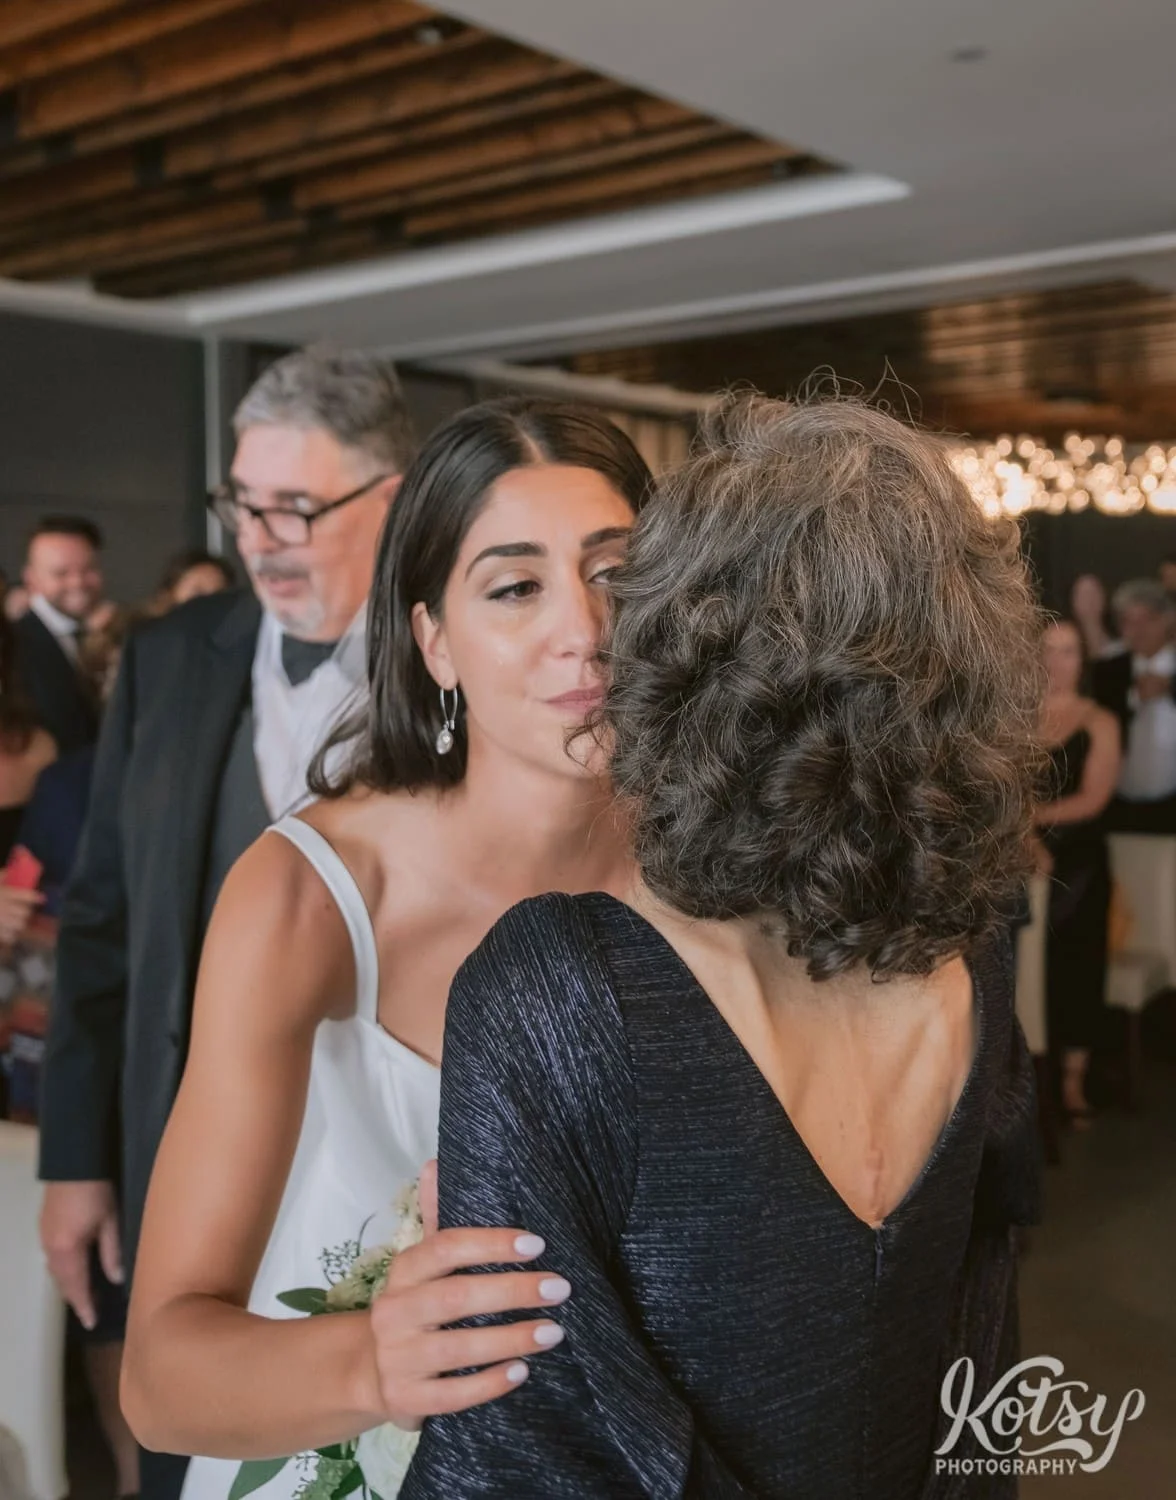 A bride kisses her mother on the cheek at the end of the aisle during a Village Loft wedding ceremony in Toronto, Canada